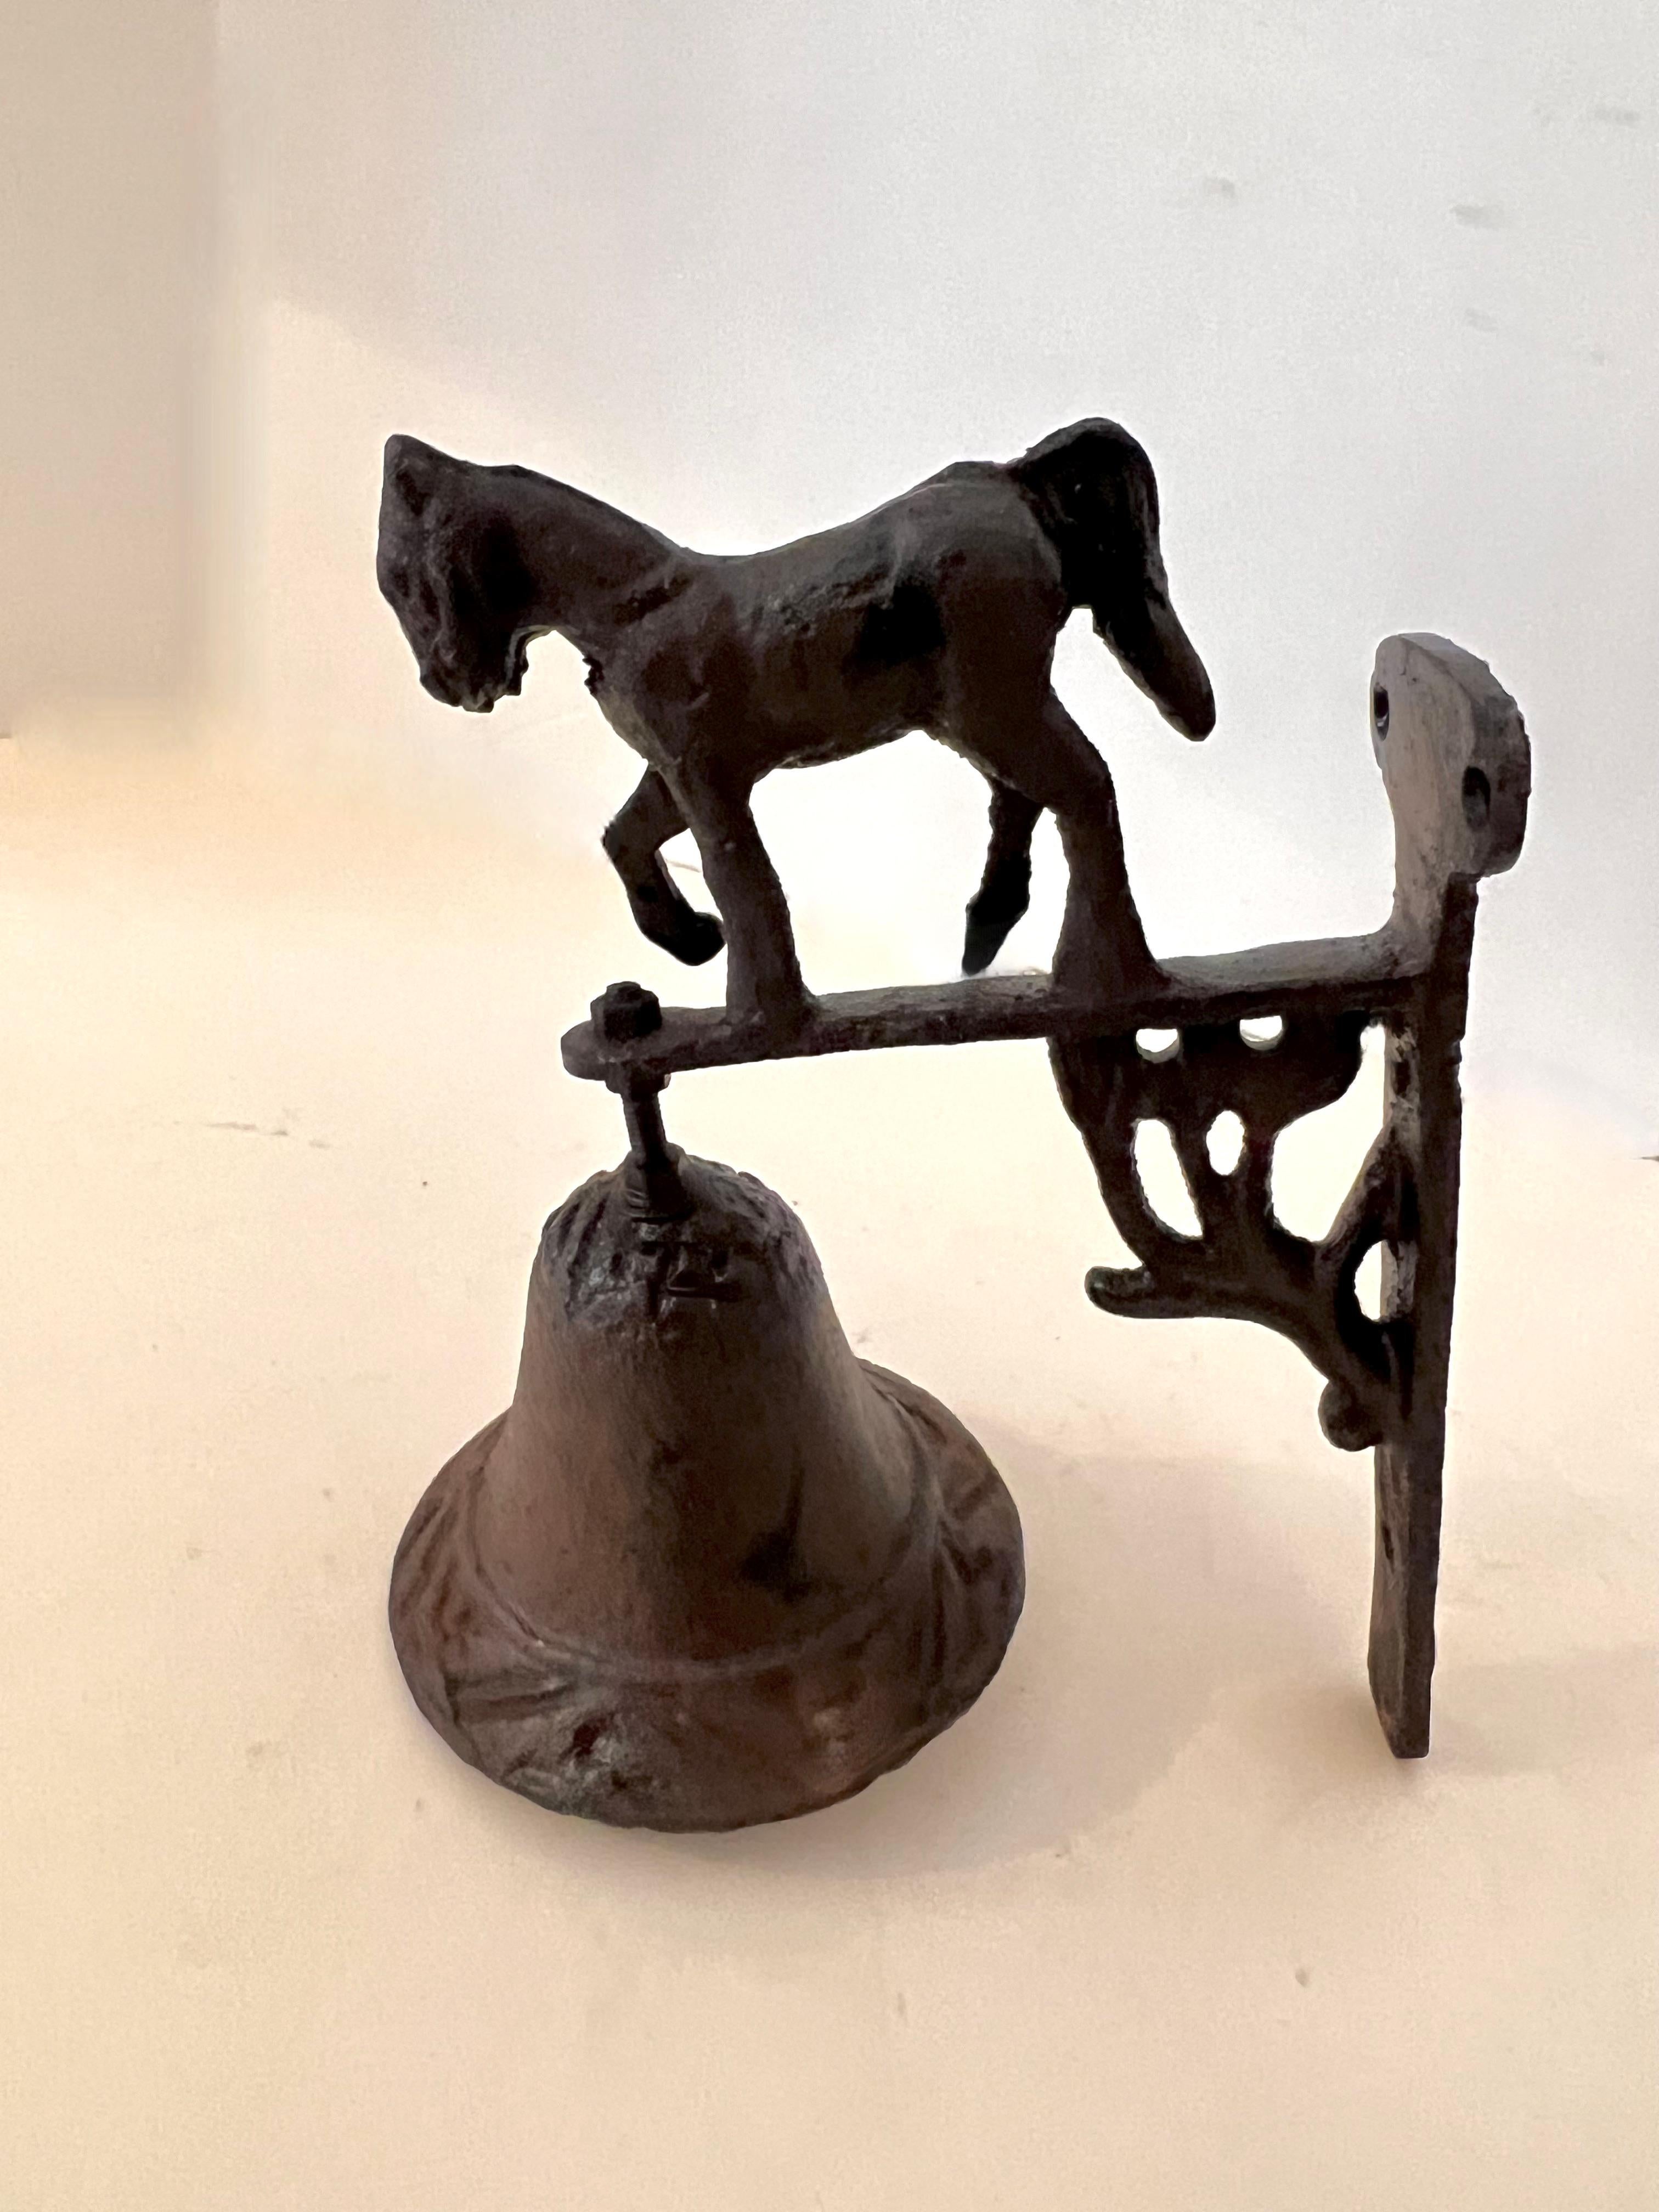 A wonderful wrought iron bell used as a notification someone has entered or moved a door - could be used at home, in a shop or in a barn. or as a decorative piece in the kitchen or garden. 

The piece is made of sturdy wrought iron and has a horse